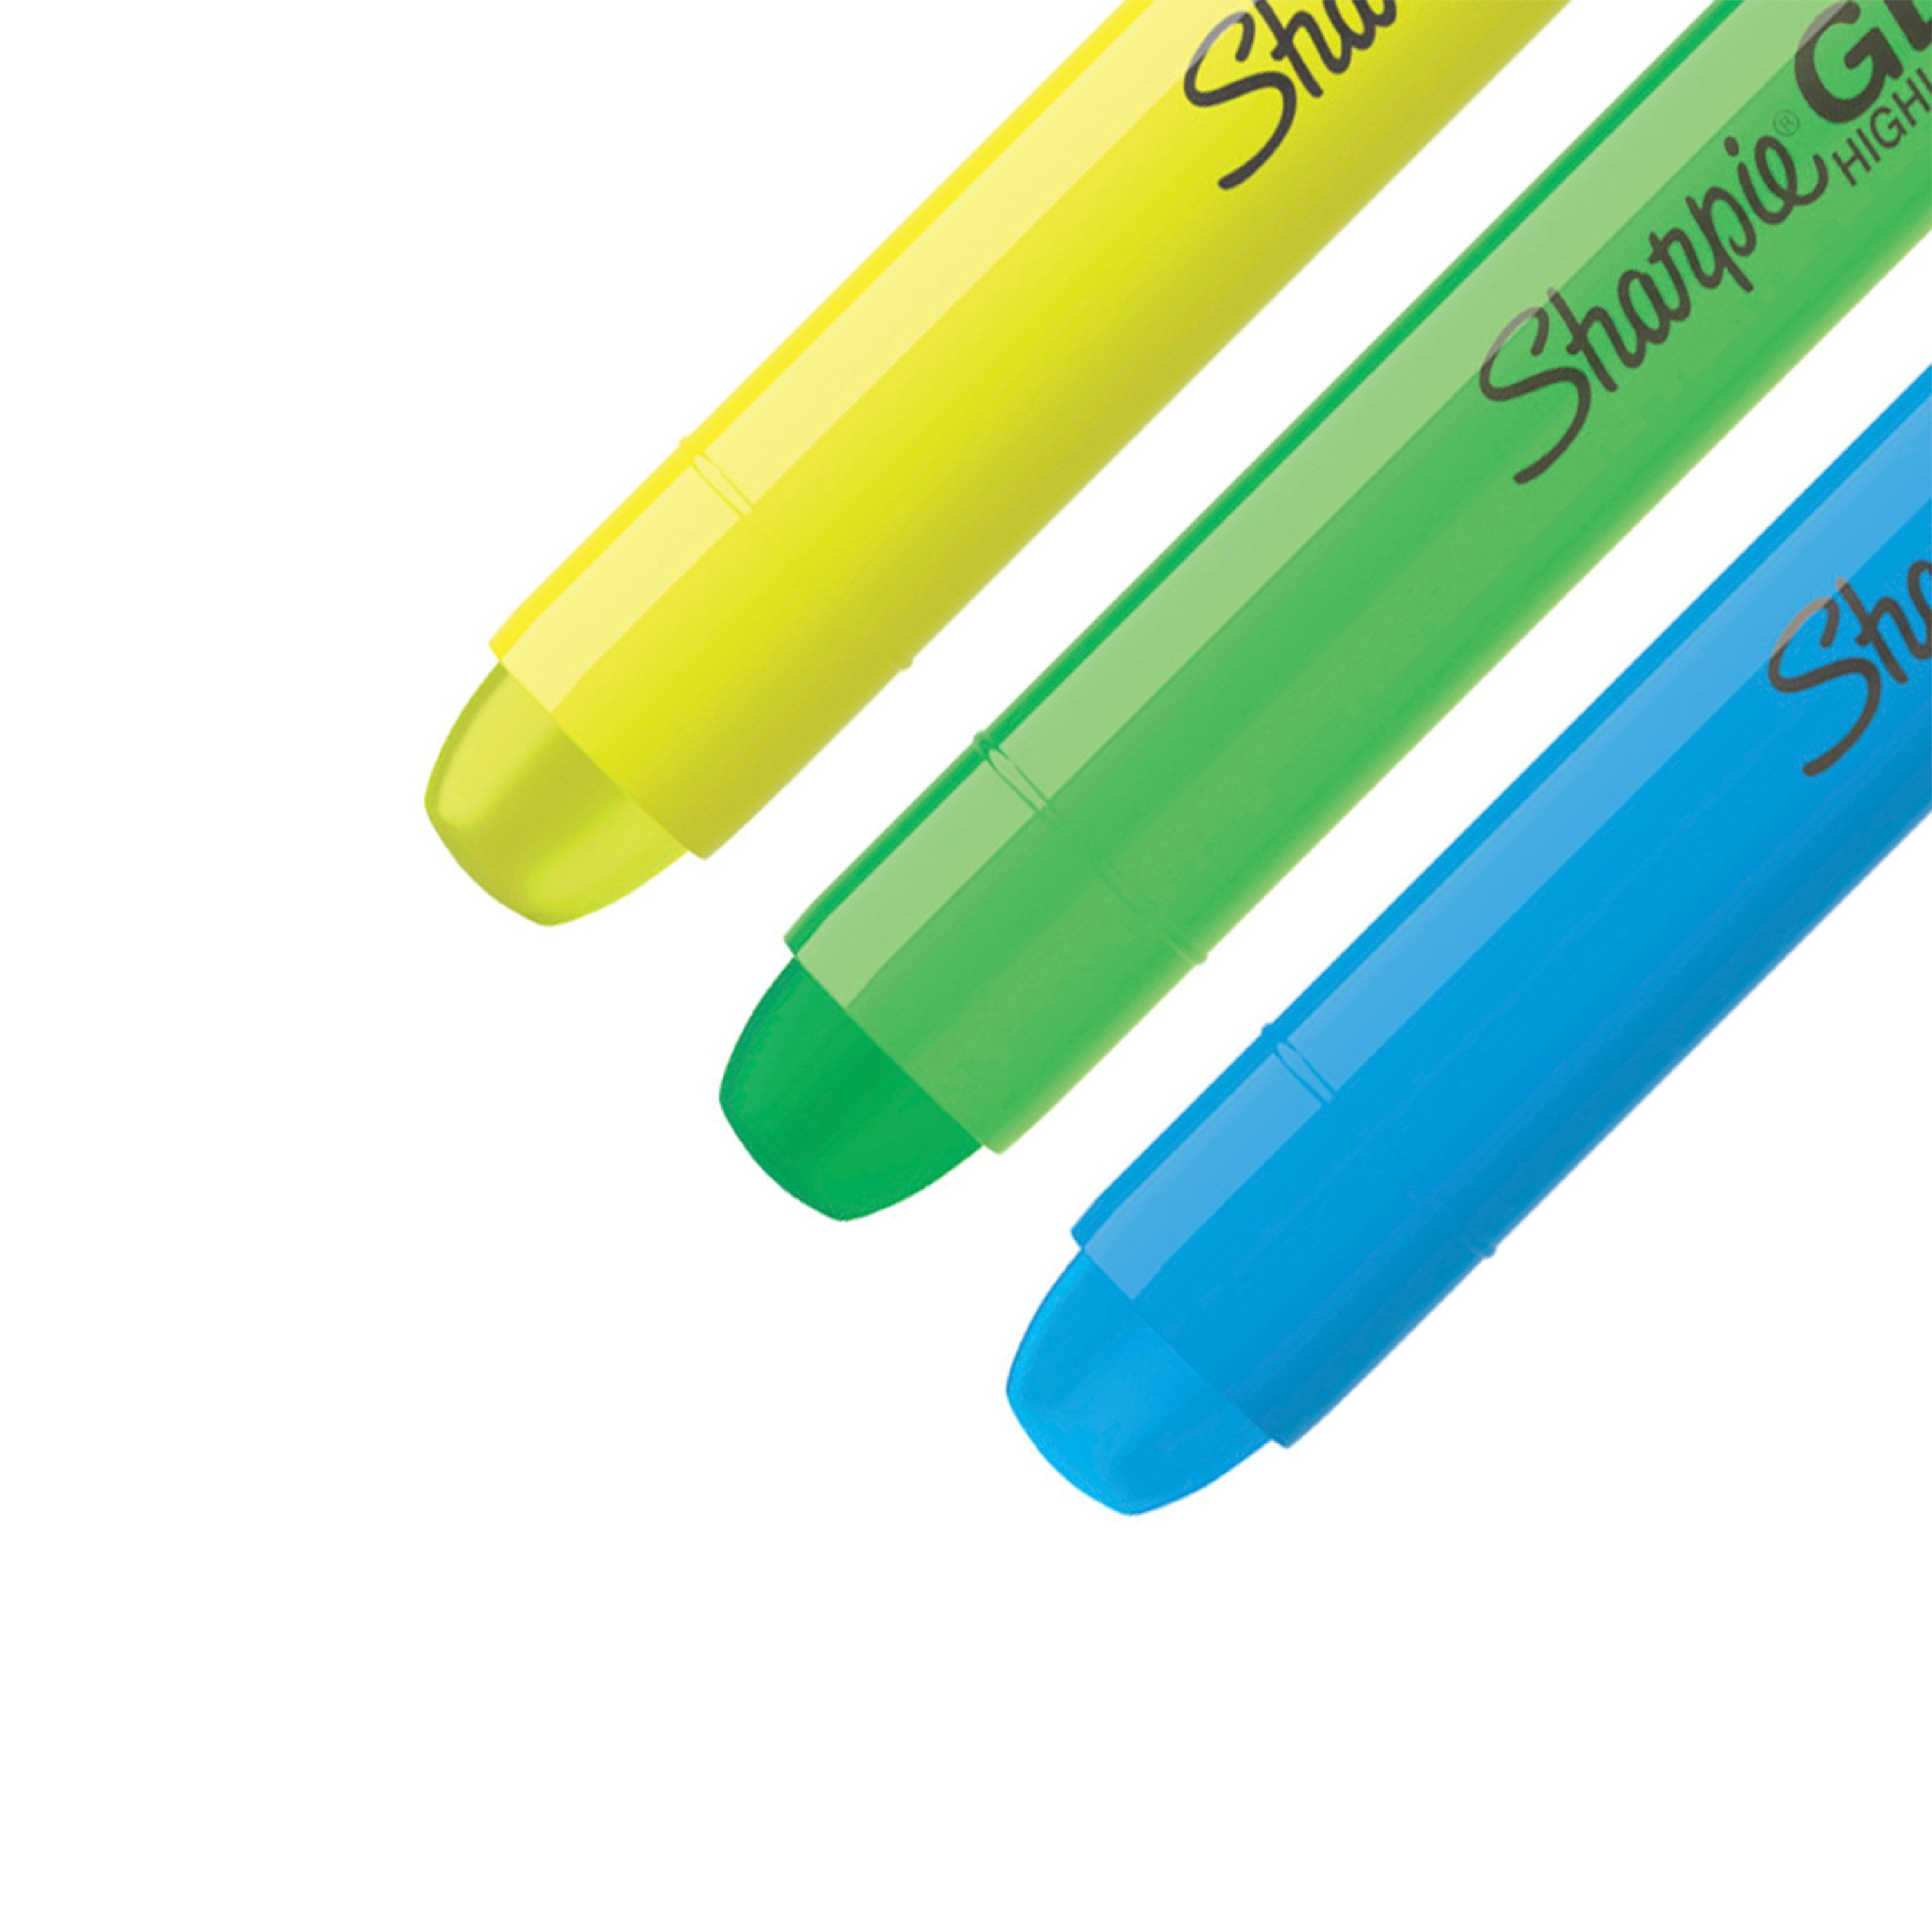 Sharpie Gel Highlighters, Assorted Colors, 3 Count 